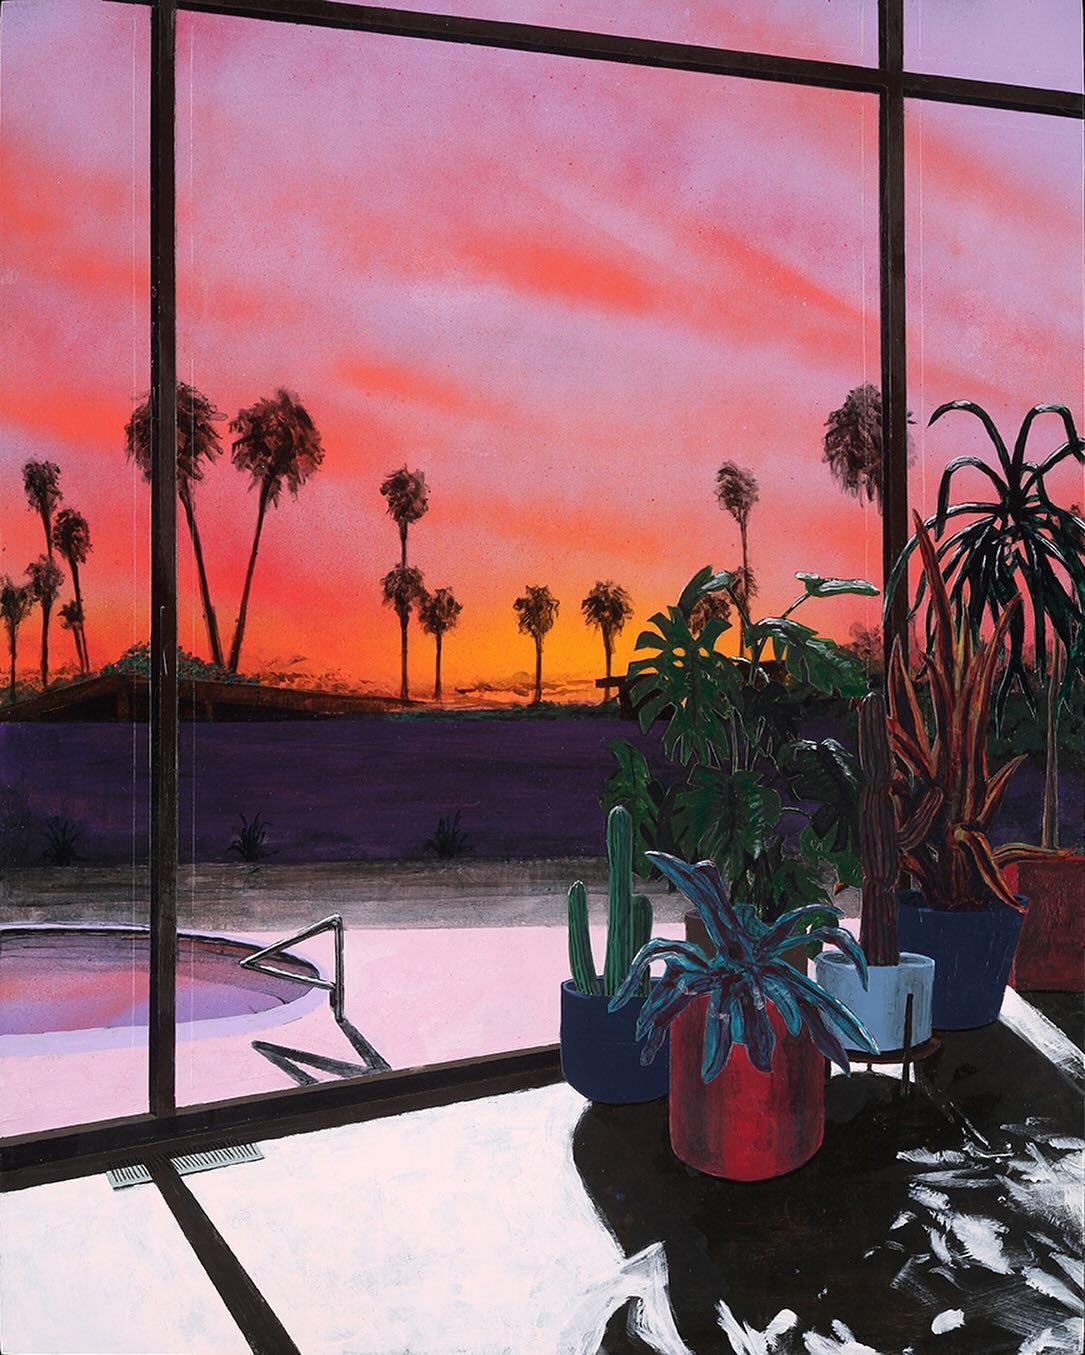 Throwing it back to 2020 today with this painting titled Sunset with Pool.. we were all stuck inside and California was on fire. Ahh the memories. This painting was an attempt to make the proverbial lemonade. #sunset #painting #throwbackthursday